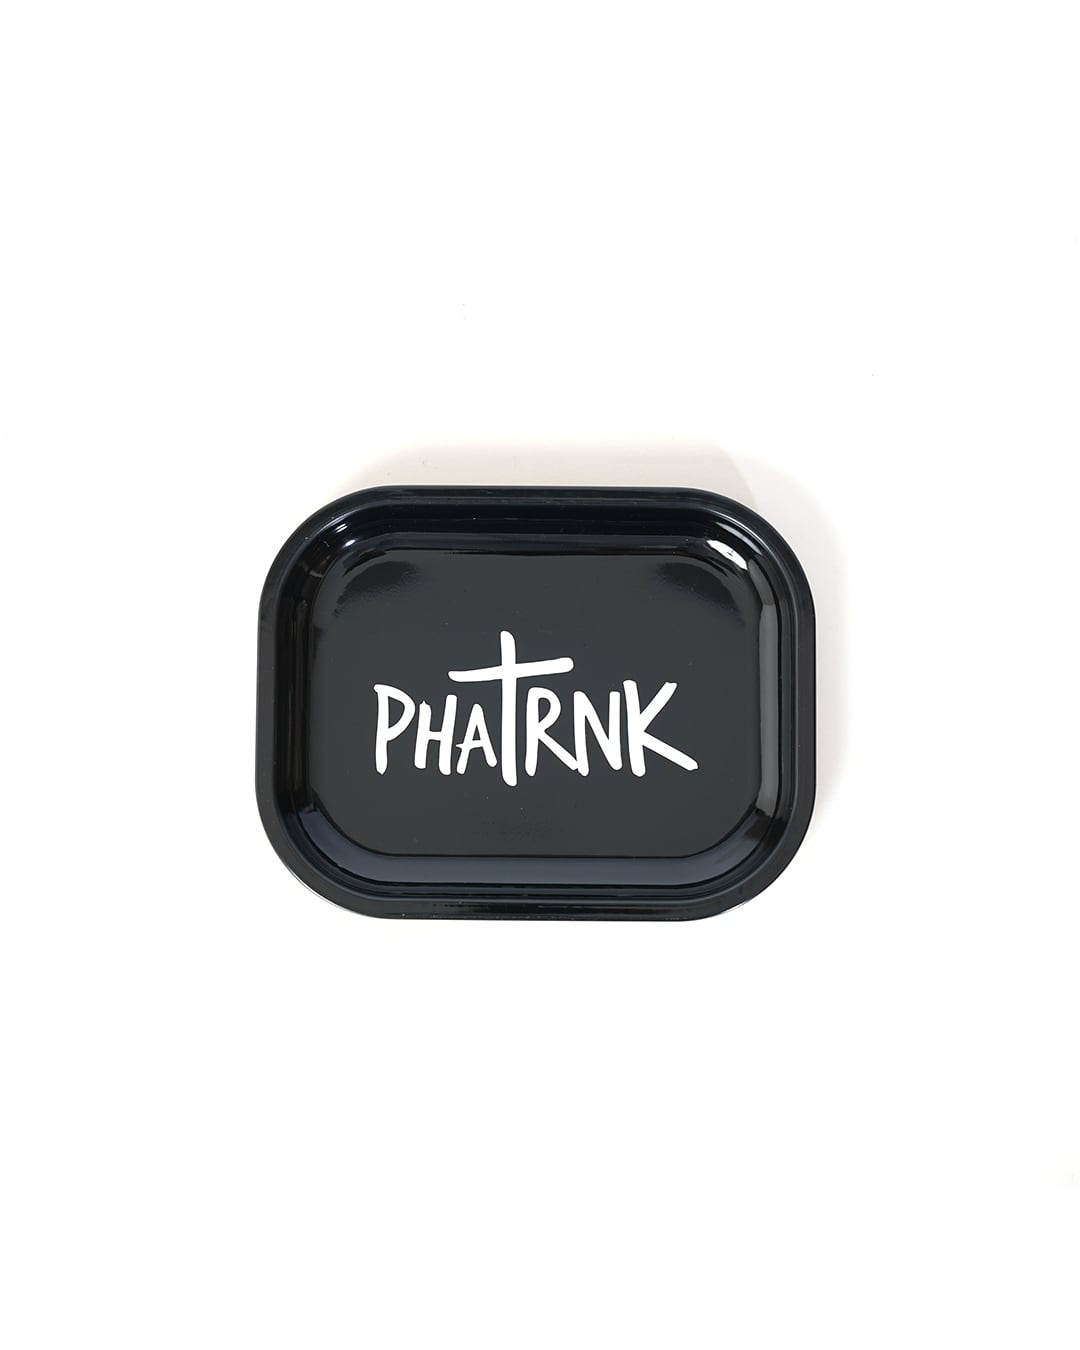 PHATRNK ORIGINAL TRAY | PHATRNK OFFICIAL ONLINE STORE powered by BASE